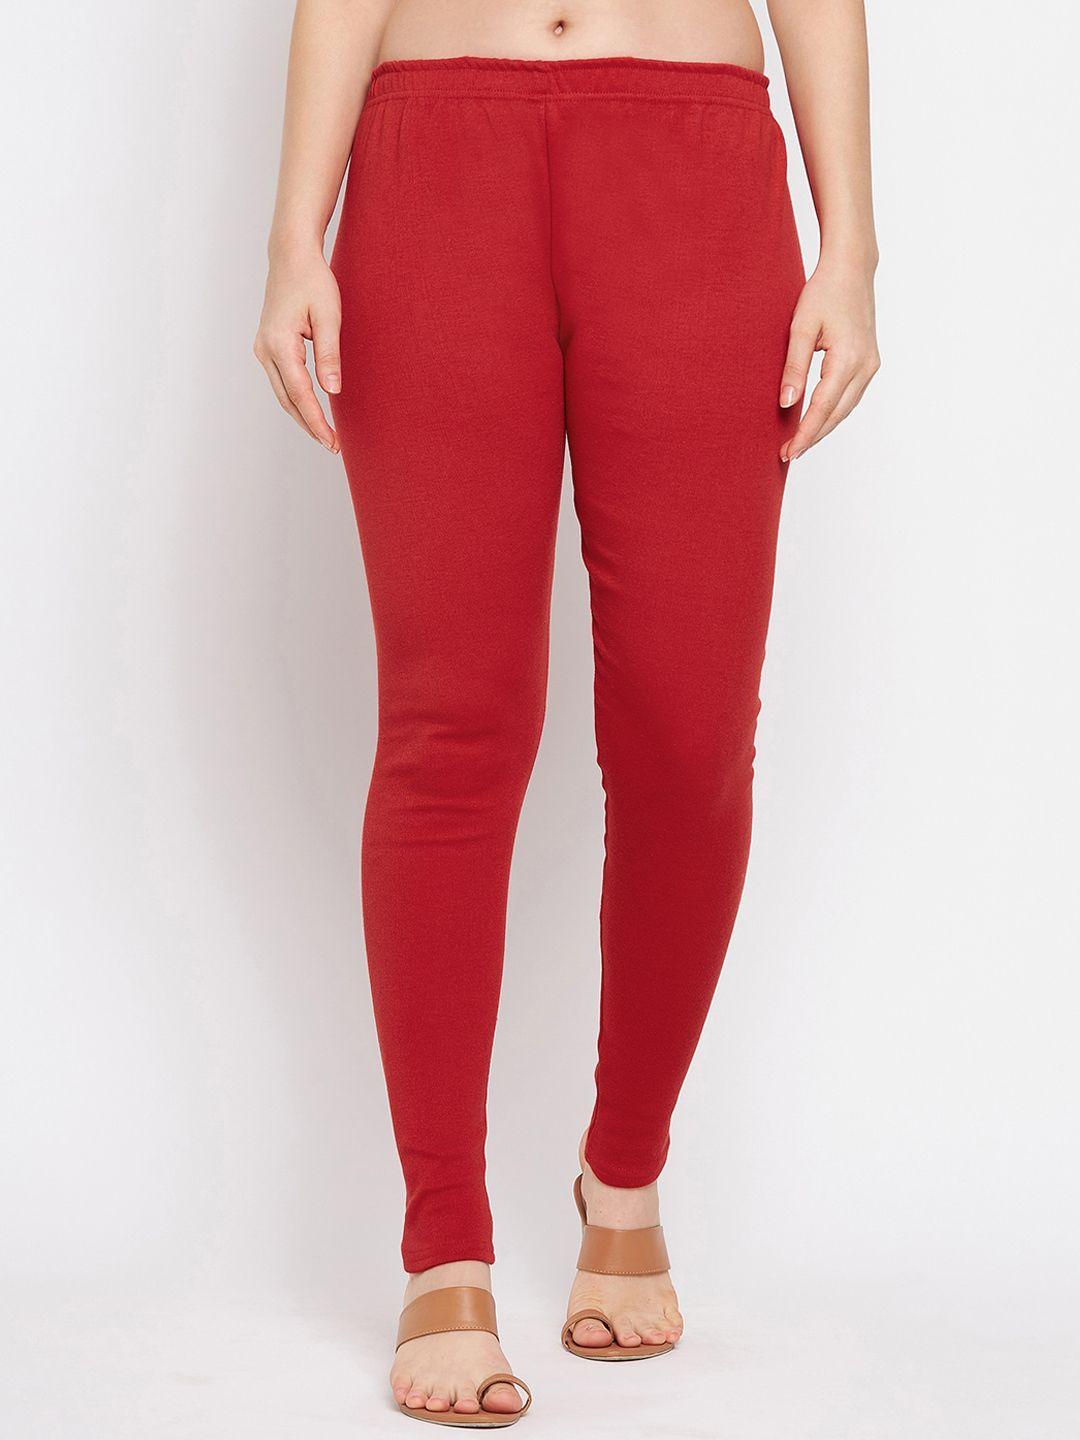 clora-creation-women-red-solid-woolen-ankle-length-leggings